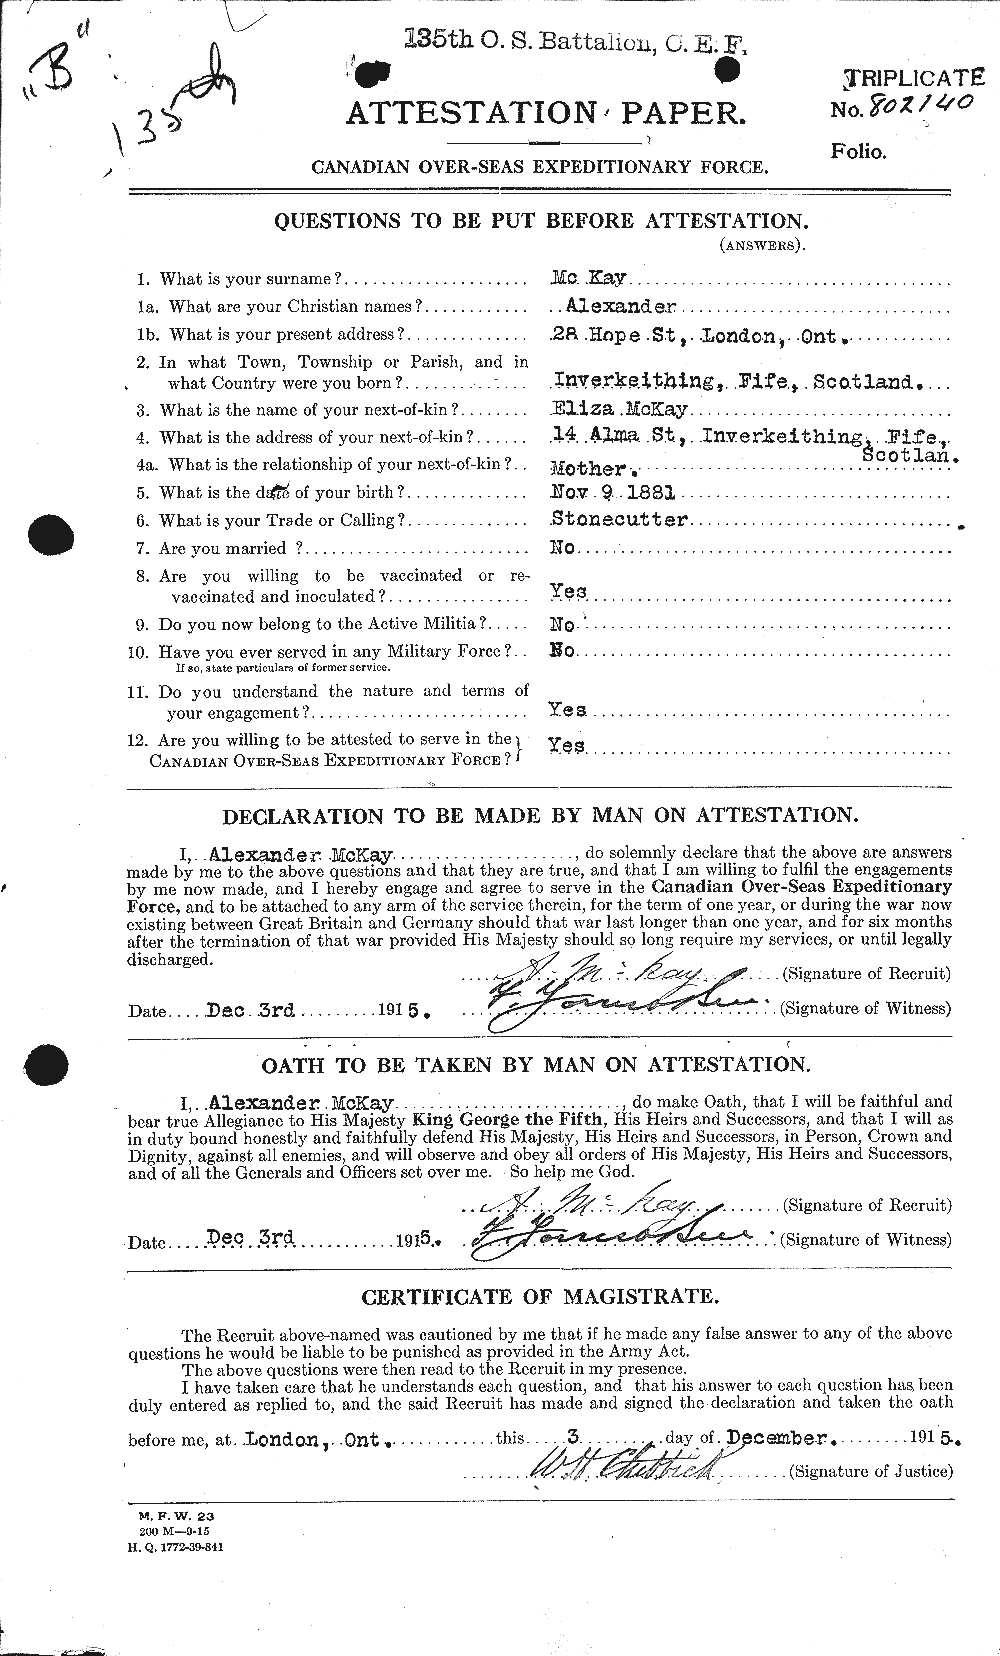 Personnel Records of the First World War - CEF 530915a